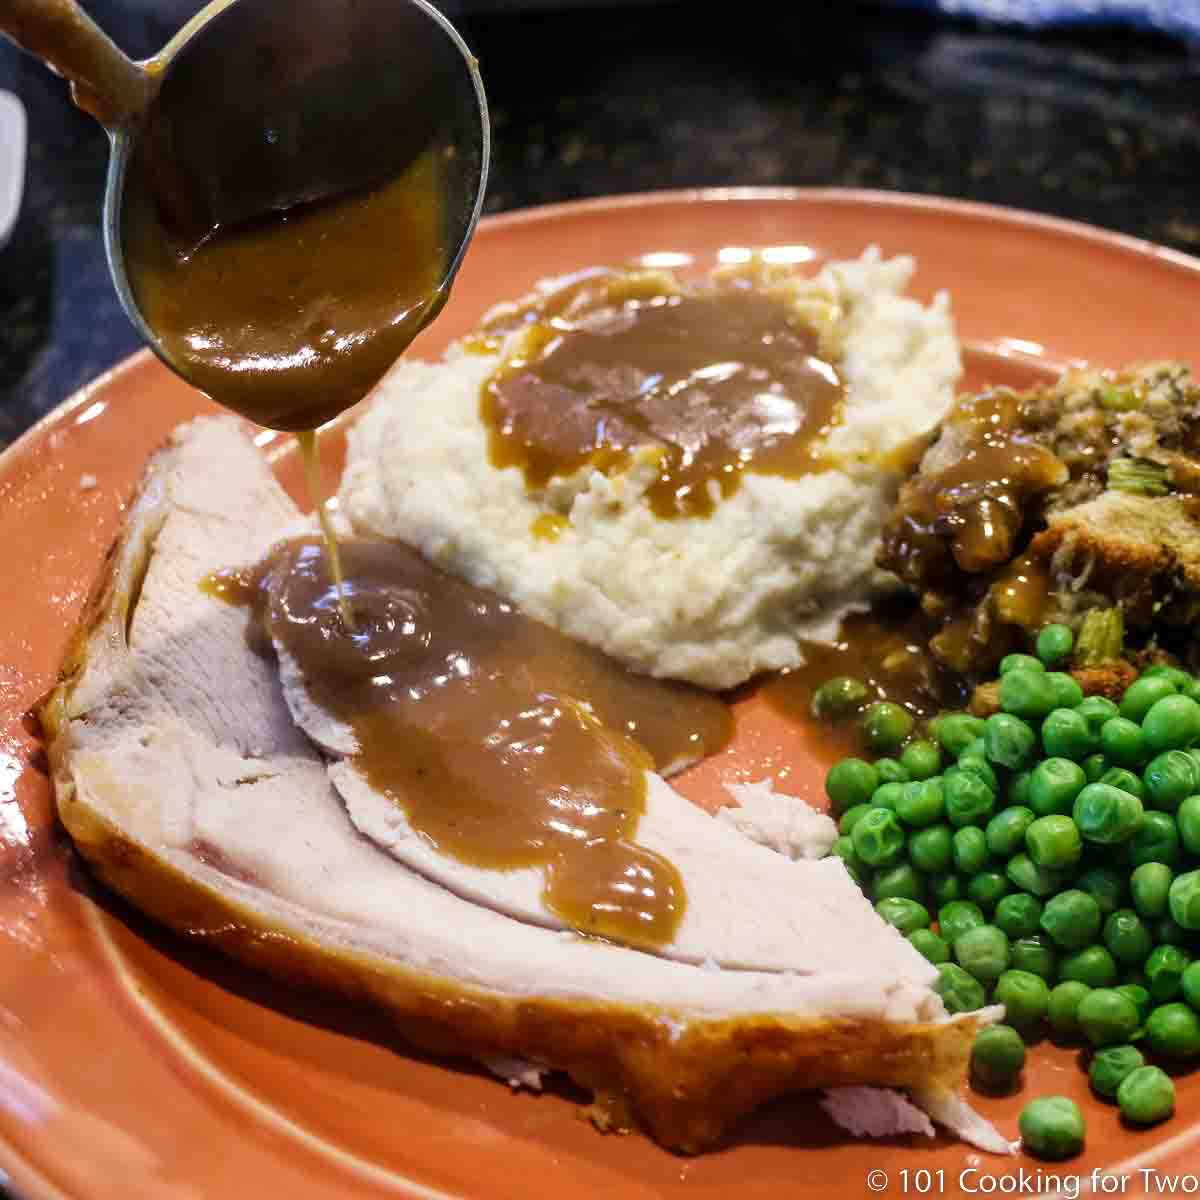 https://www.101cookingfortwo.com/wp-content/uploads/2022/11/pouring-gravy-on-turkey-and-potatoes.jpg